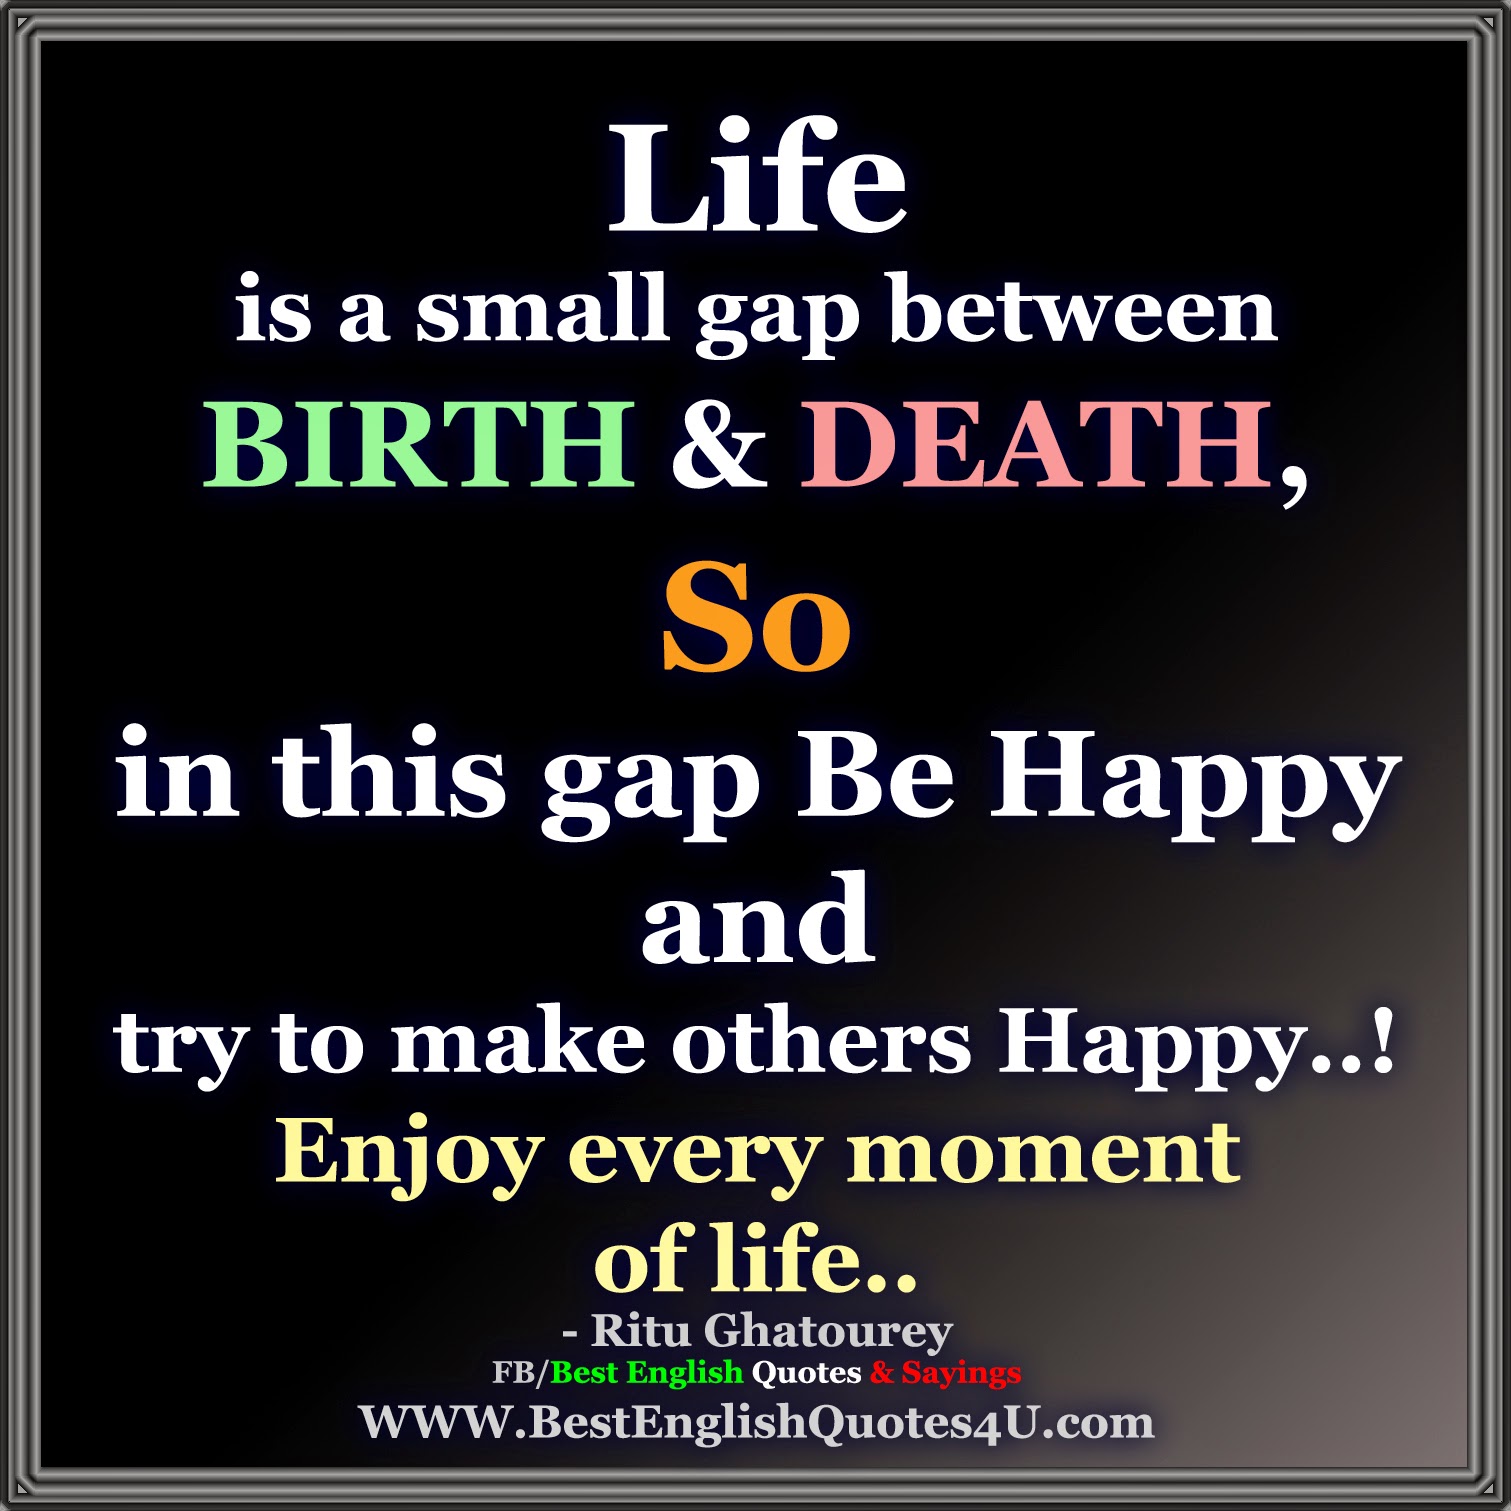 Best English Quotes And Sayings Life Is A Small Gap Between Birth Death